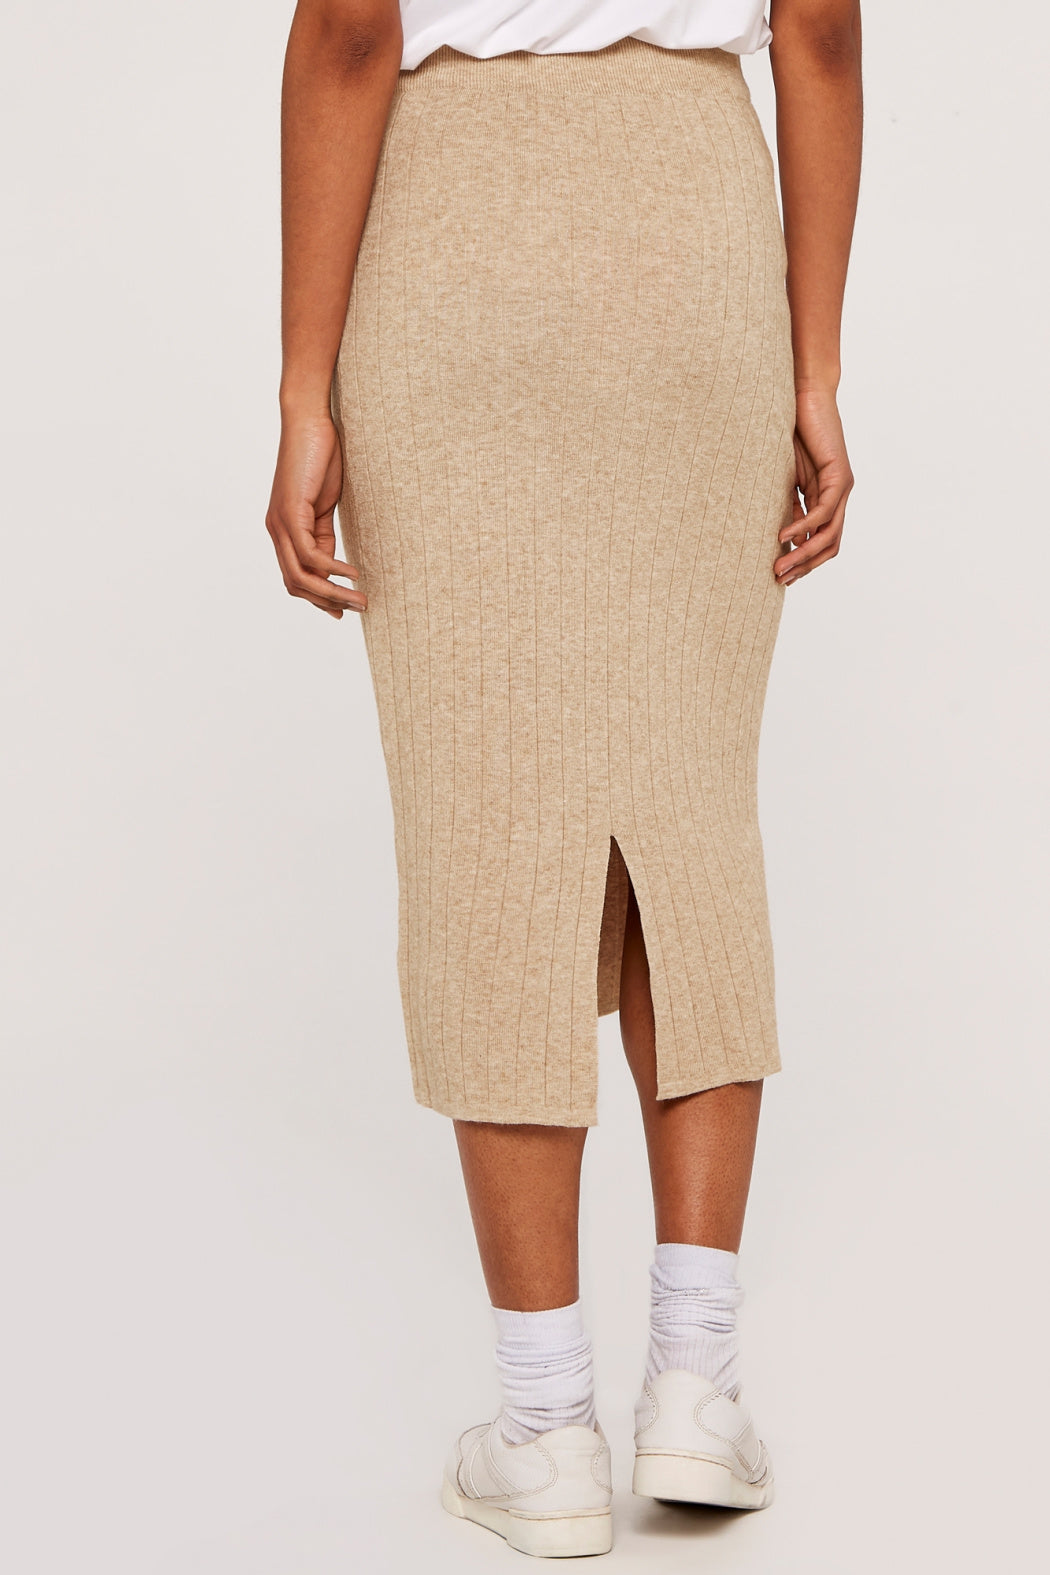 Stone Ribbed Knit Skirt | Apricot - Clearance